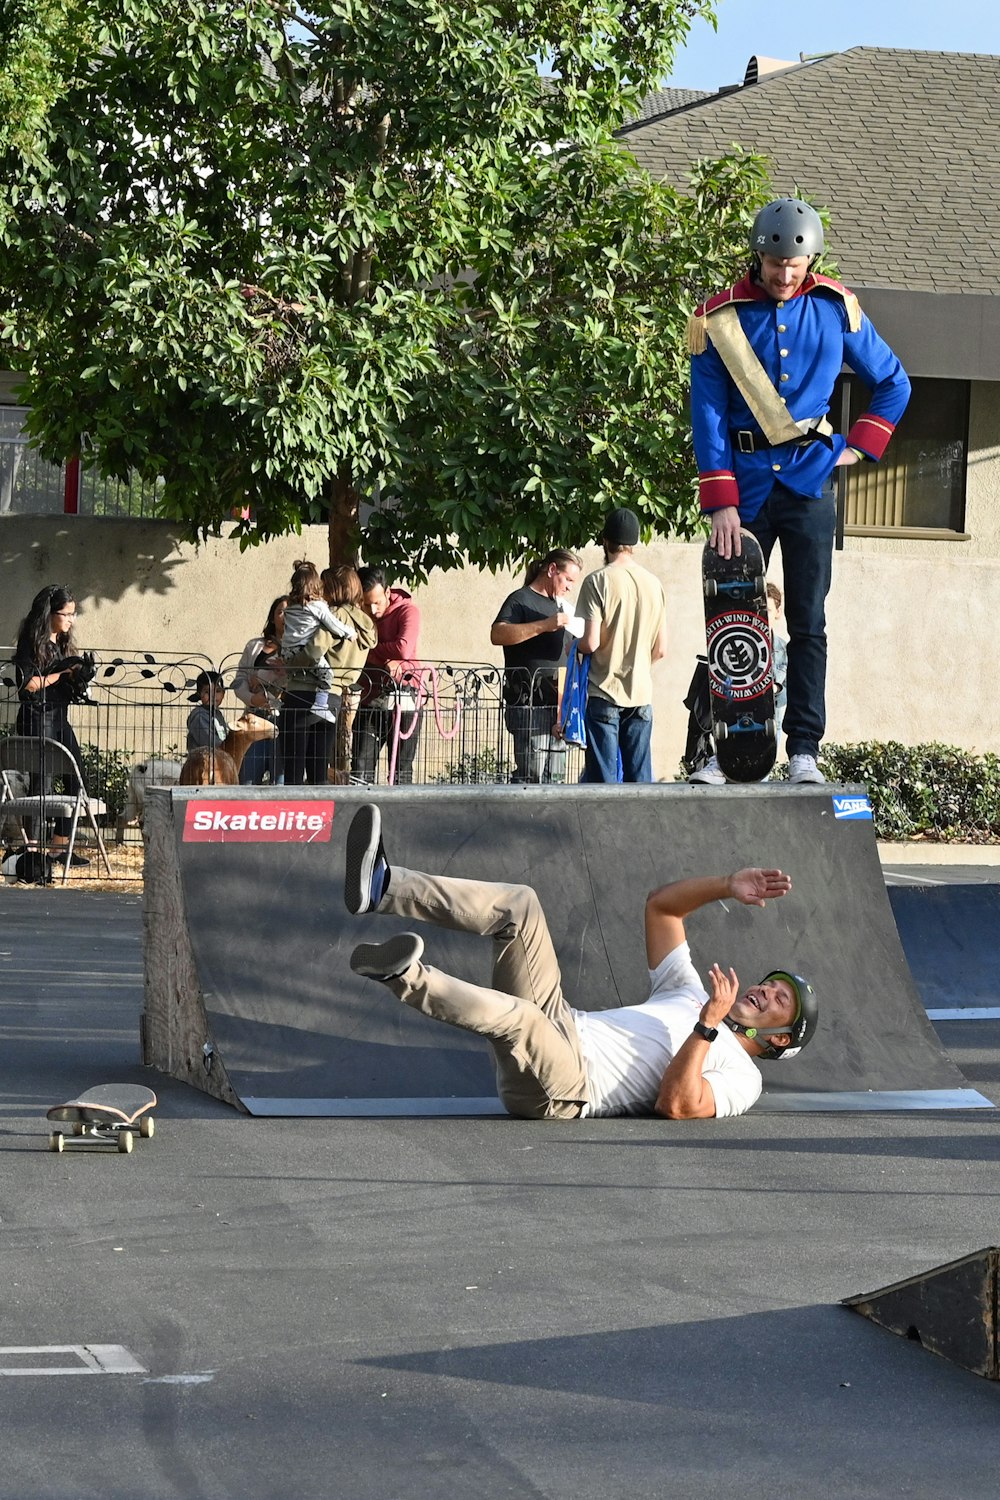 person playing skating lying on ground during daytime